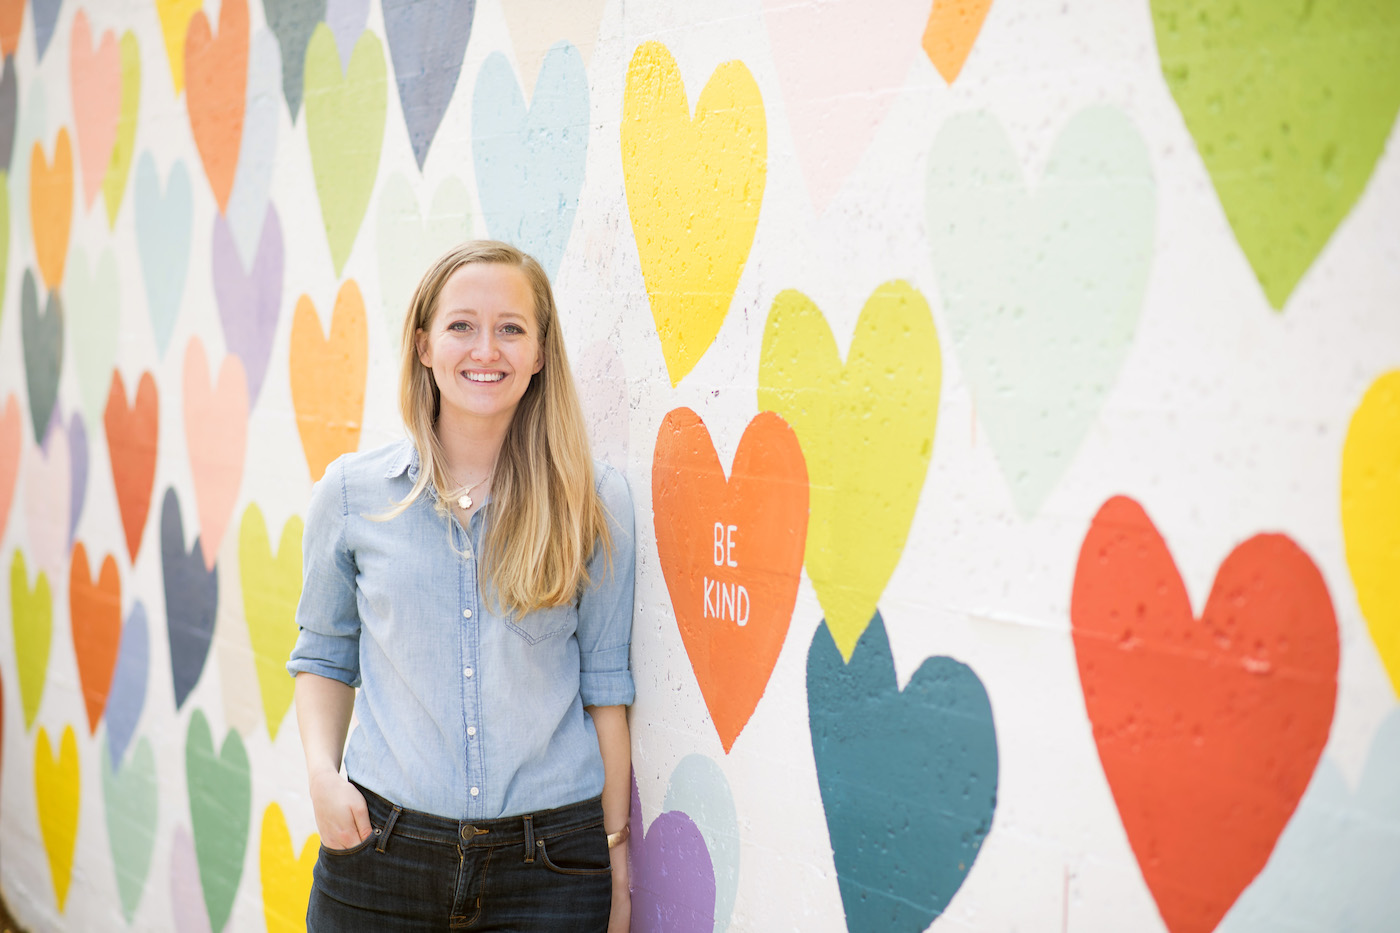 A Guide to Charlotte NC: Confetti Hearts Wall Edition! – Evelyn Henson